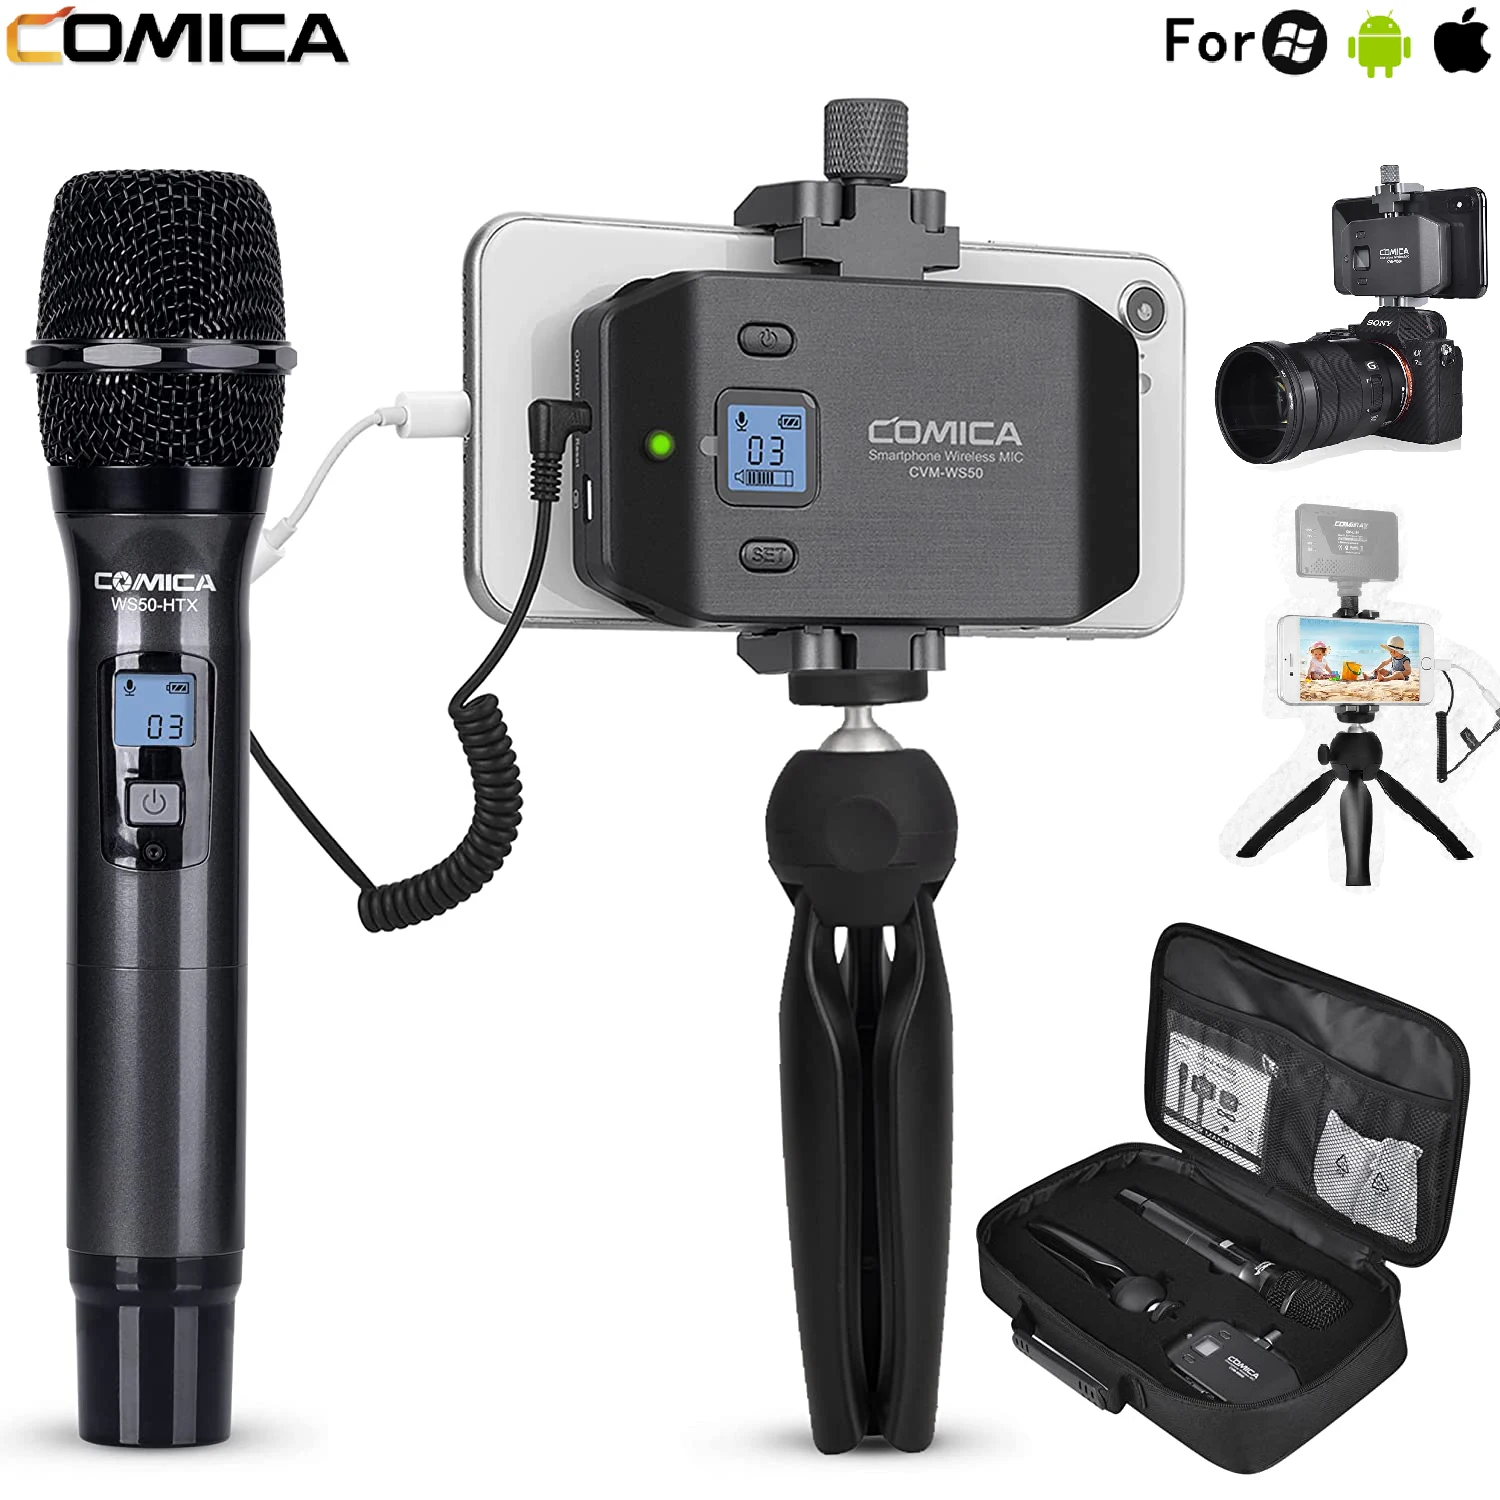 

Comica Wireless Microphone With Tripod For iPhone Android Smartphone Dslr Camera Handheld Microphone For Interview, WS50H